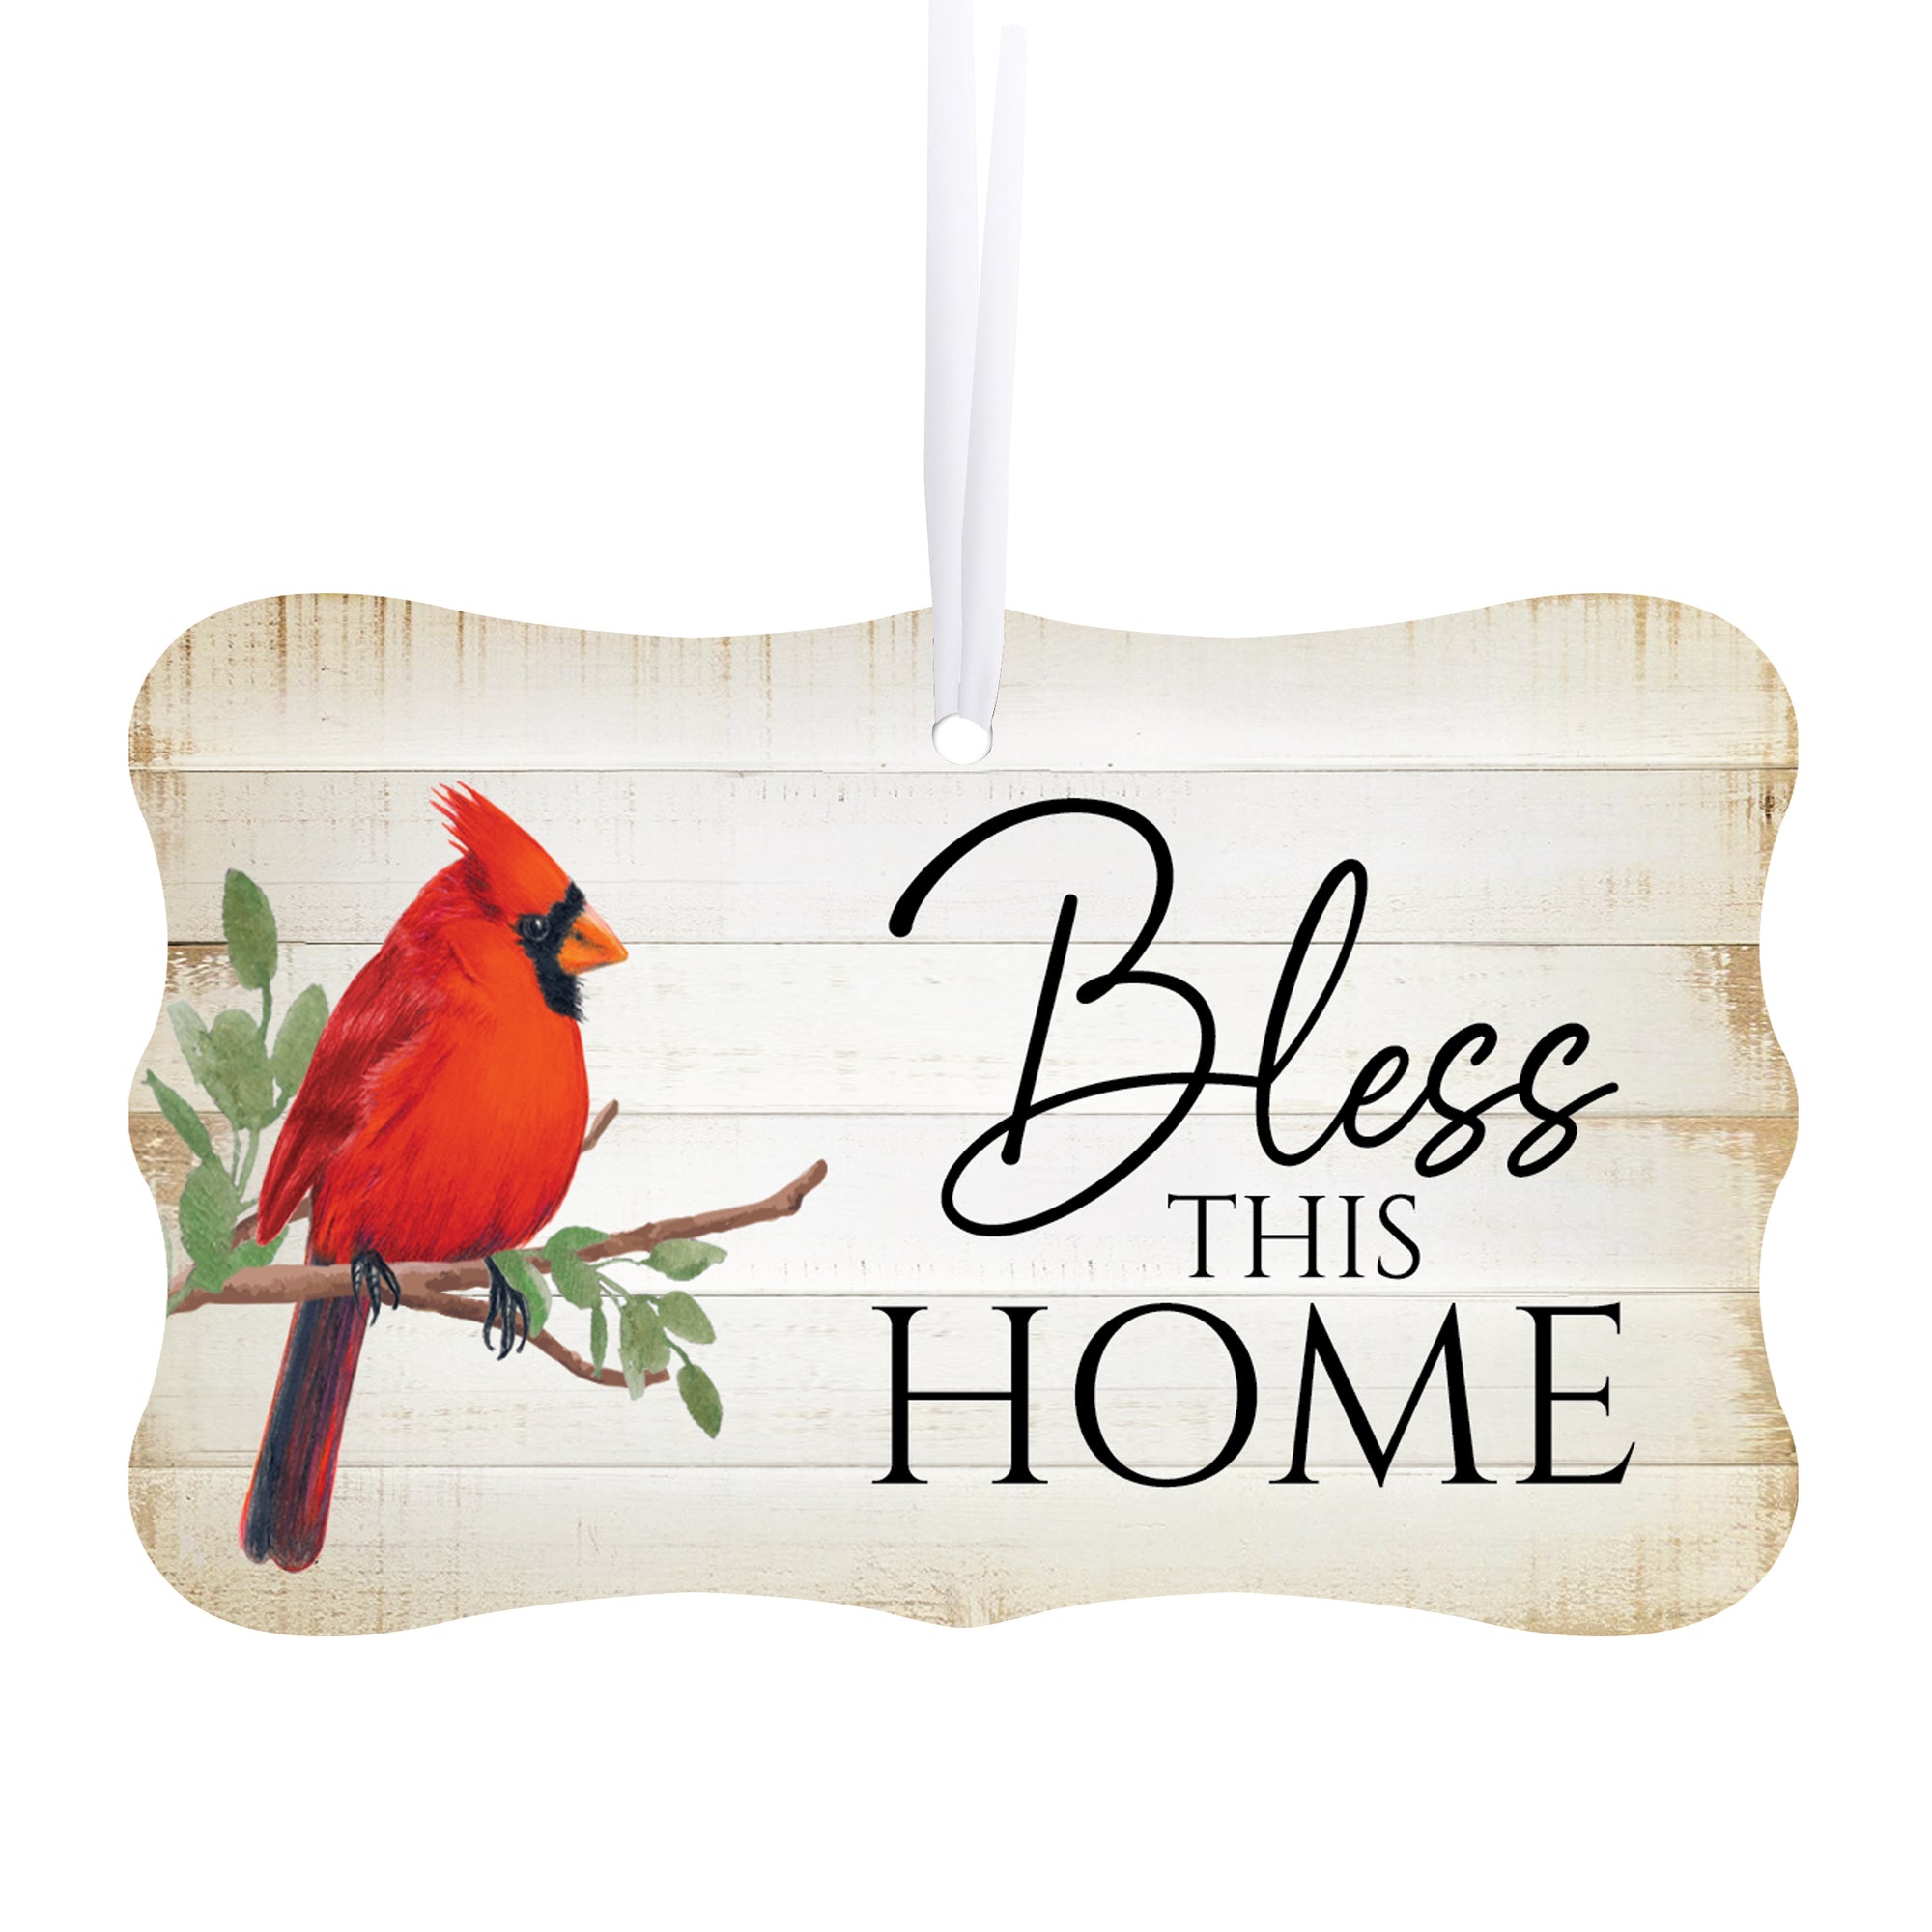 Rustic Scalloped Cardinal Wooden Ornament With Everyday Verses Gift Ideas - Bless This Home